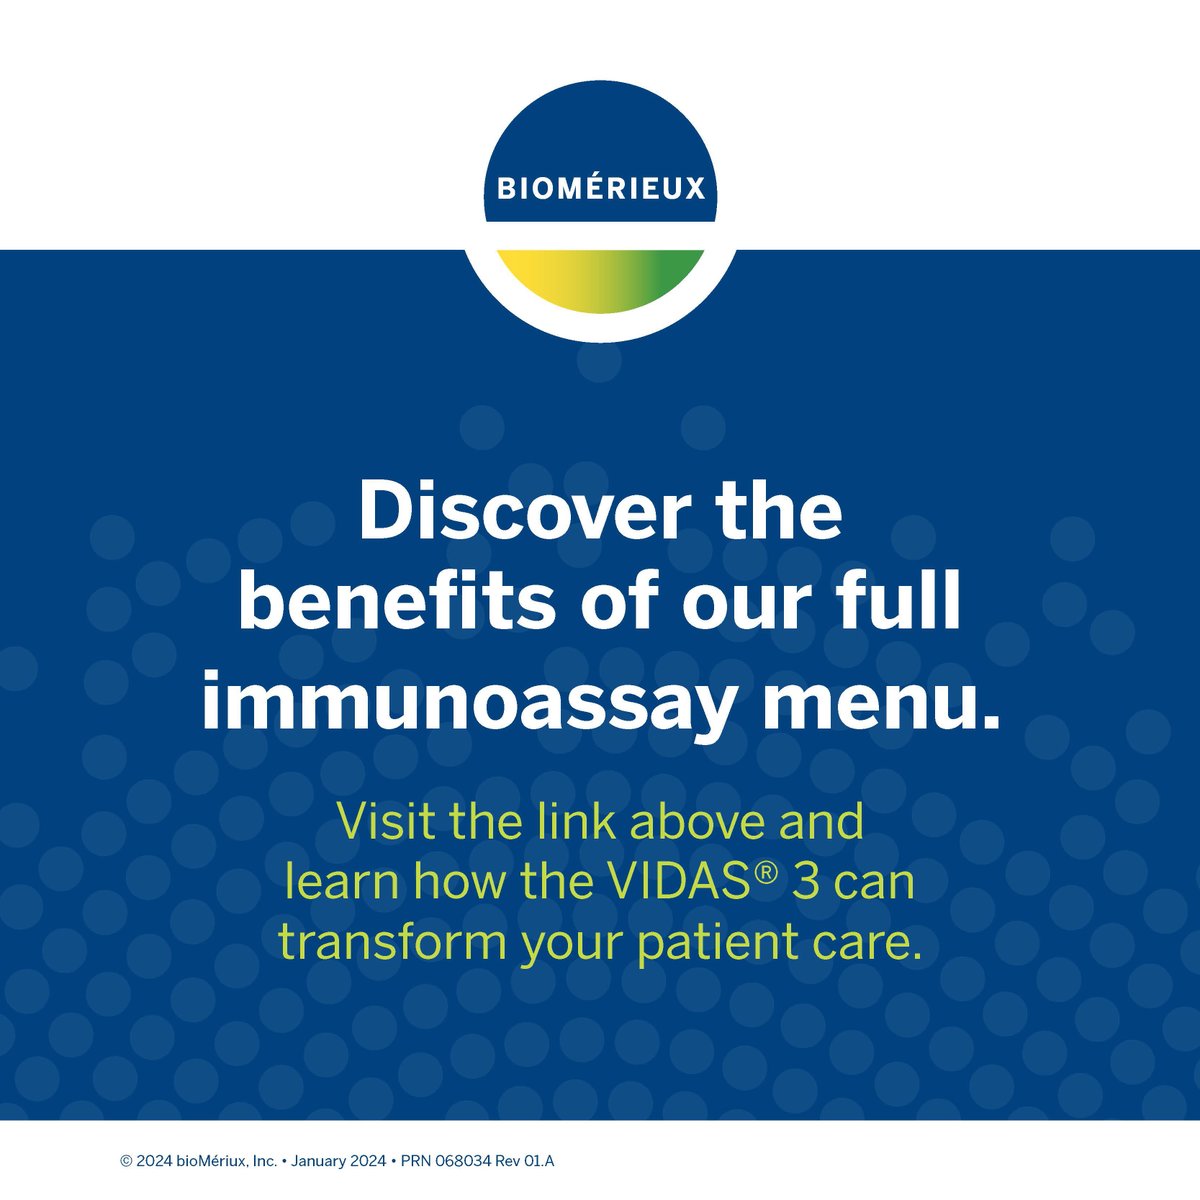 Have you heard of our occupational health assay menu from VIDAS® 3? With the VIDAS® MEASLES IgG, MUMPS IgG, RUBELLA IgG, and VARICELLA IgG tests, gain rapid insights into a patient's immune status in ~34-40 min. Learn more: bit.ly/49qZ6Dz   #nineweeksofvidas